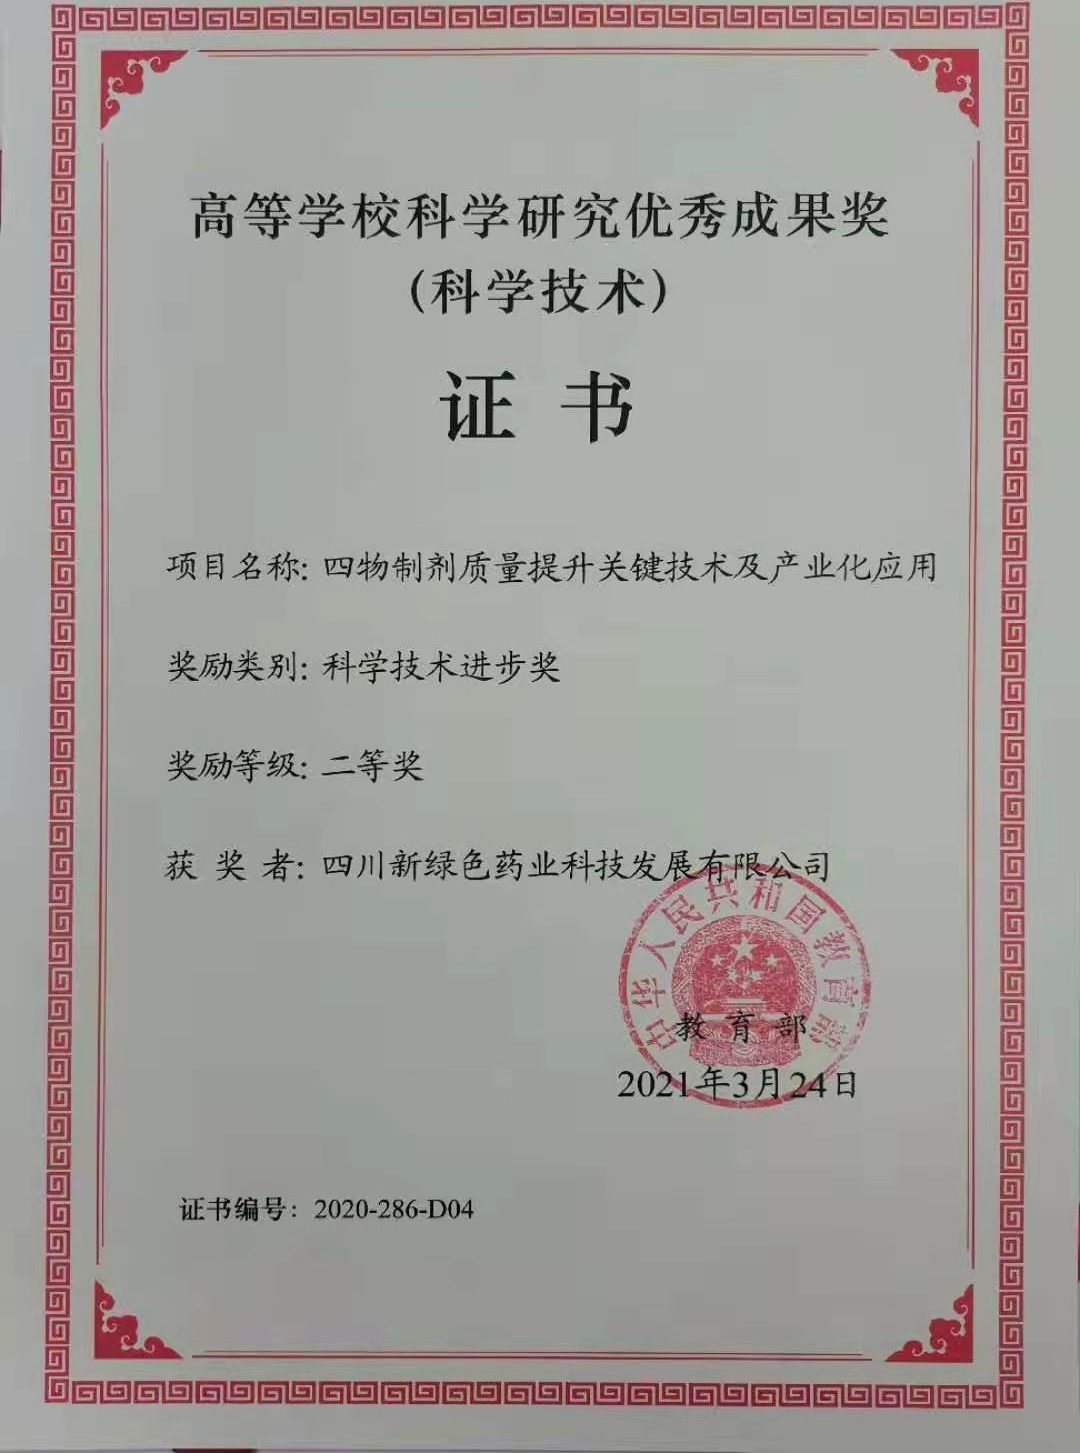 Outstanding achievement award of scientific research in Colleges and universities (winner: Sichuan new green)